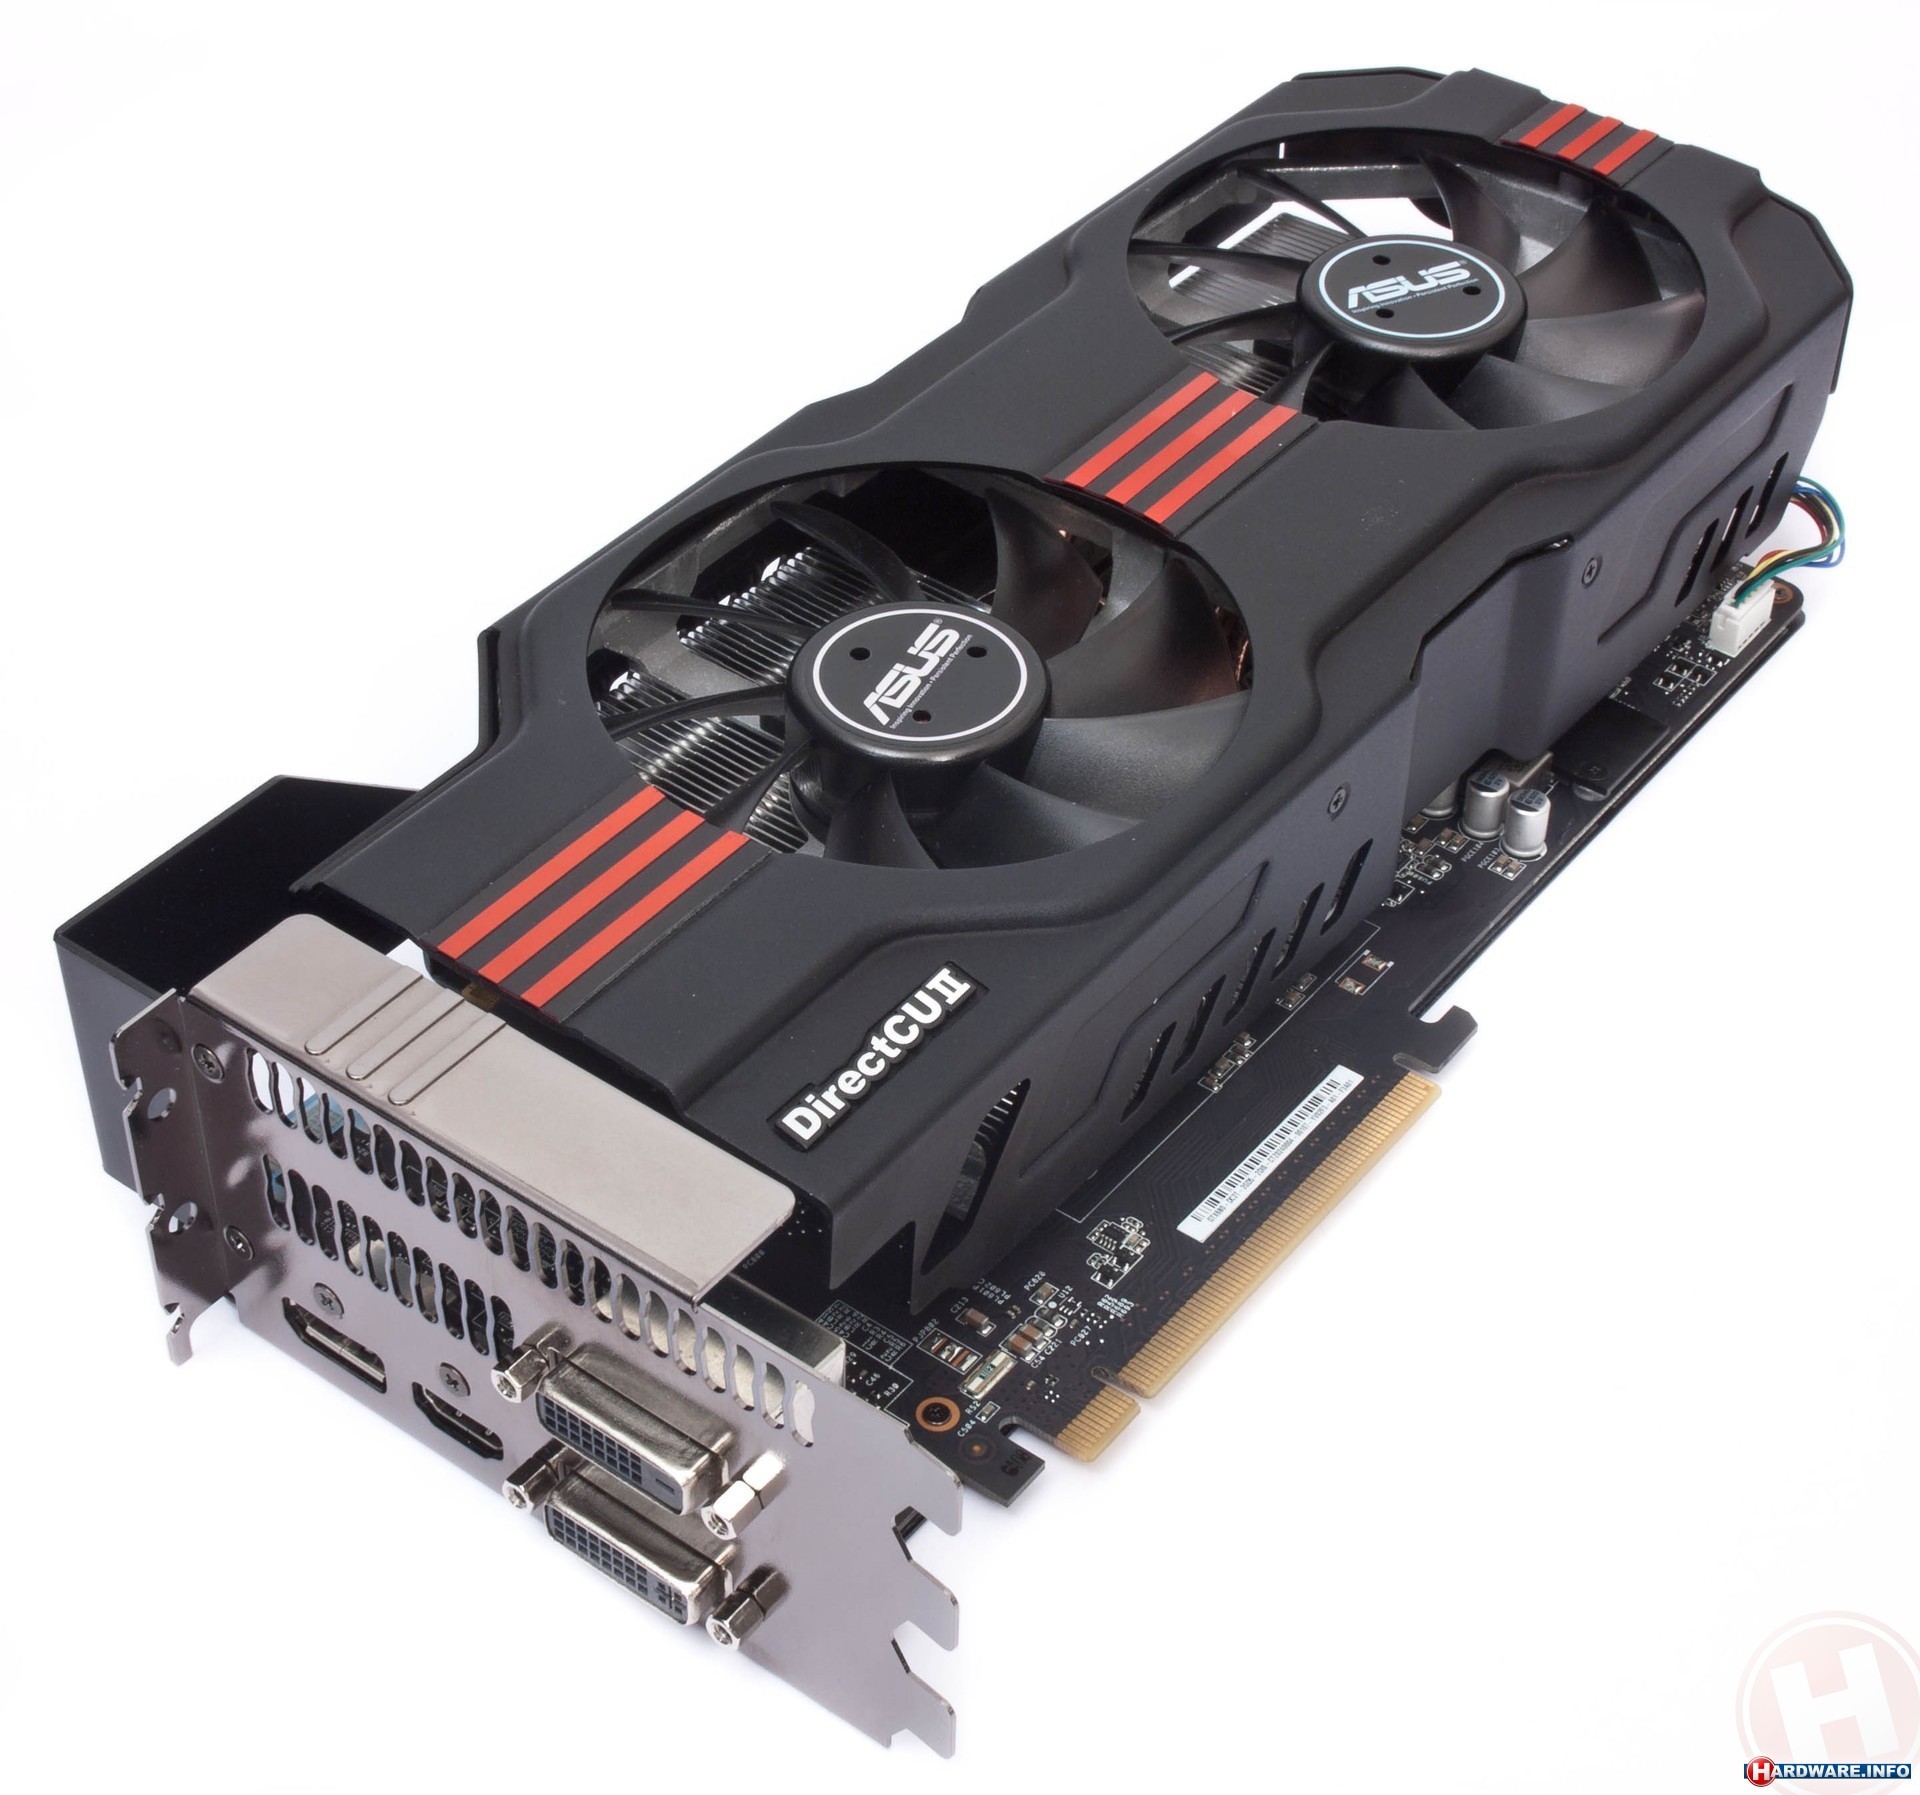 nvidia geforce gtx 680 2gb review